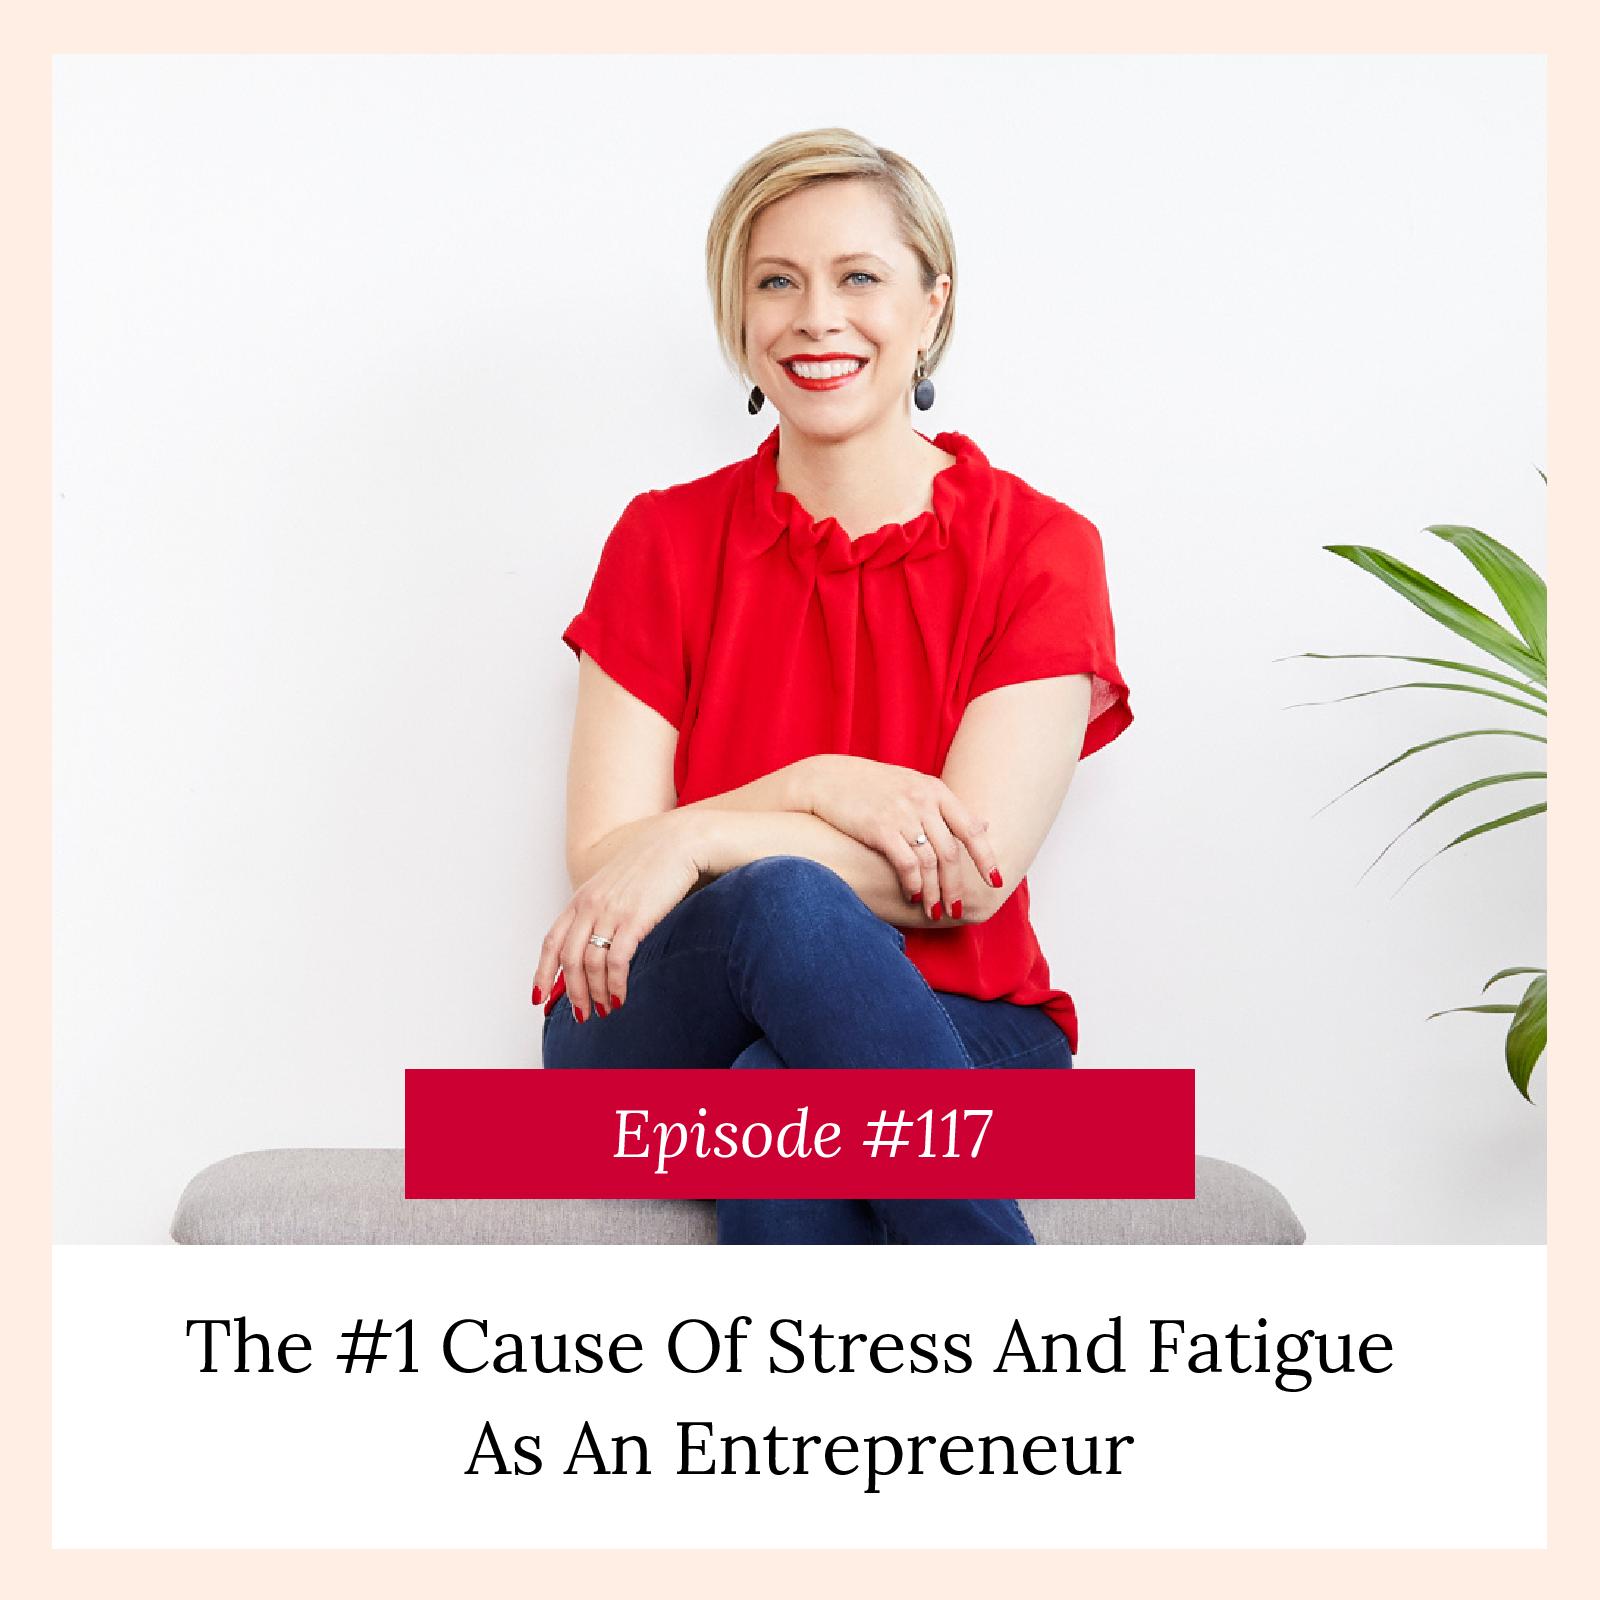 Reasons behind stress and fatigue as a business owner